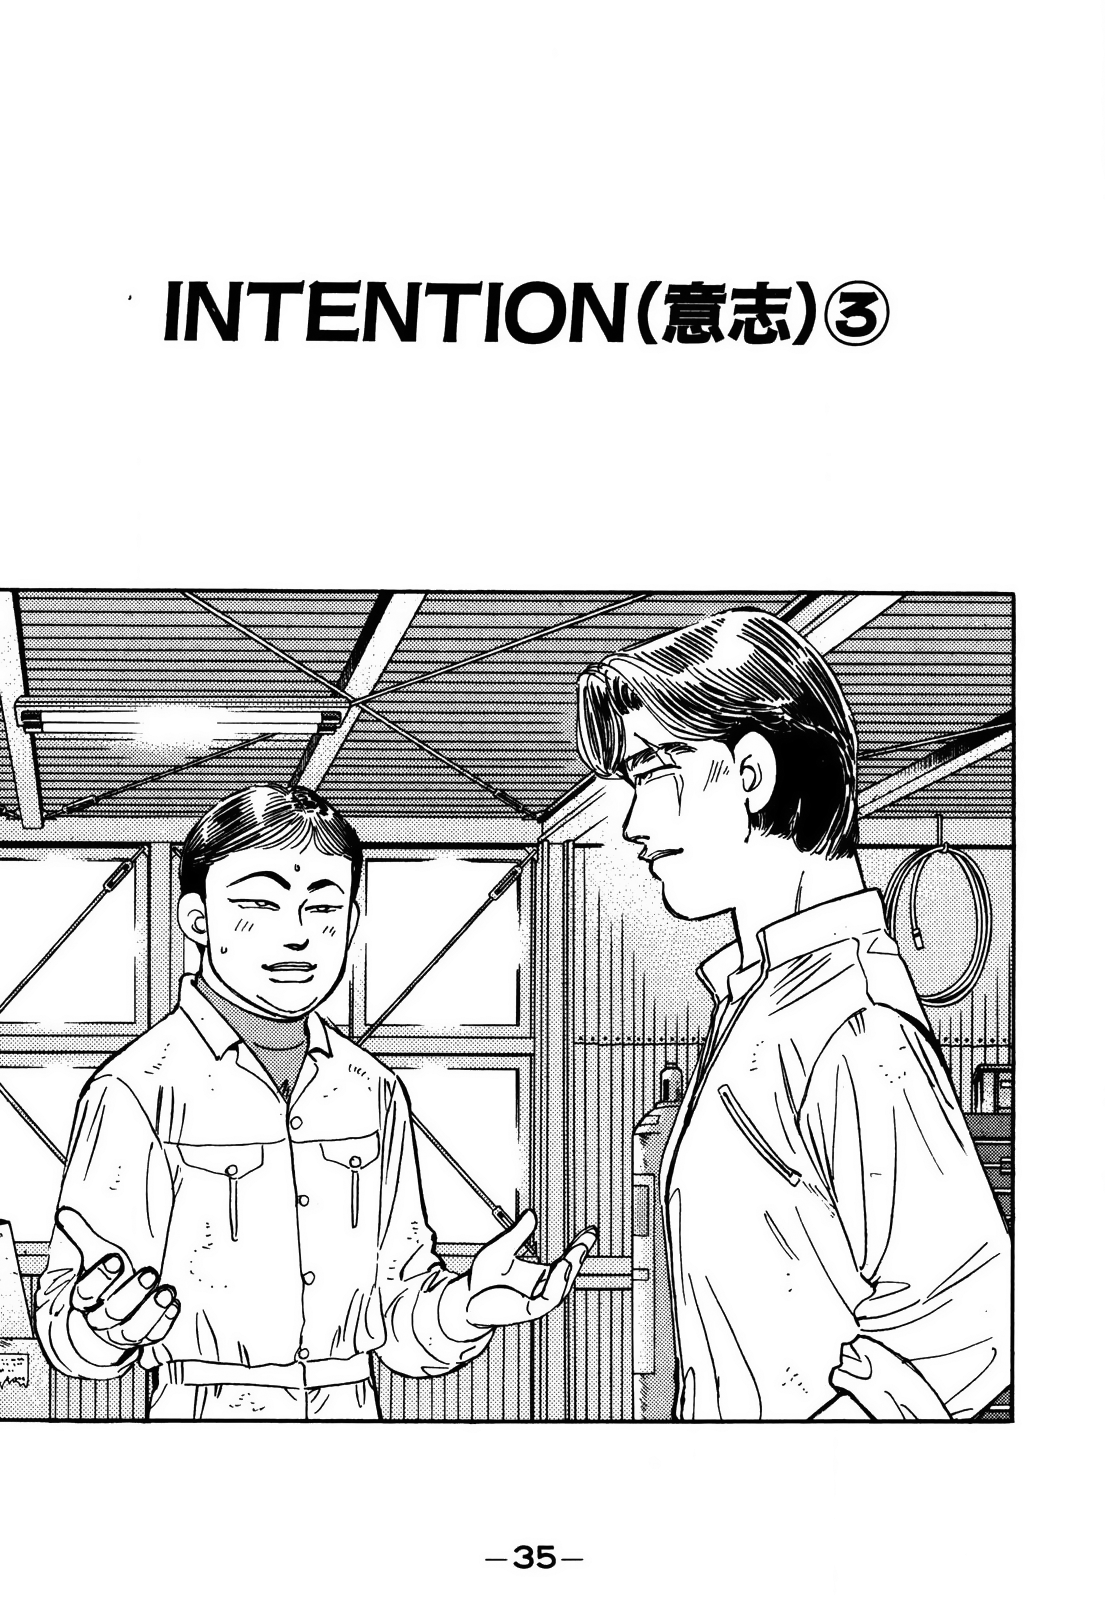 Wangan Midnight Vol.13 Chapter 149: Intention ③ - Picture 1